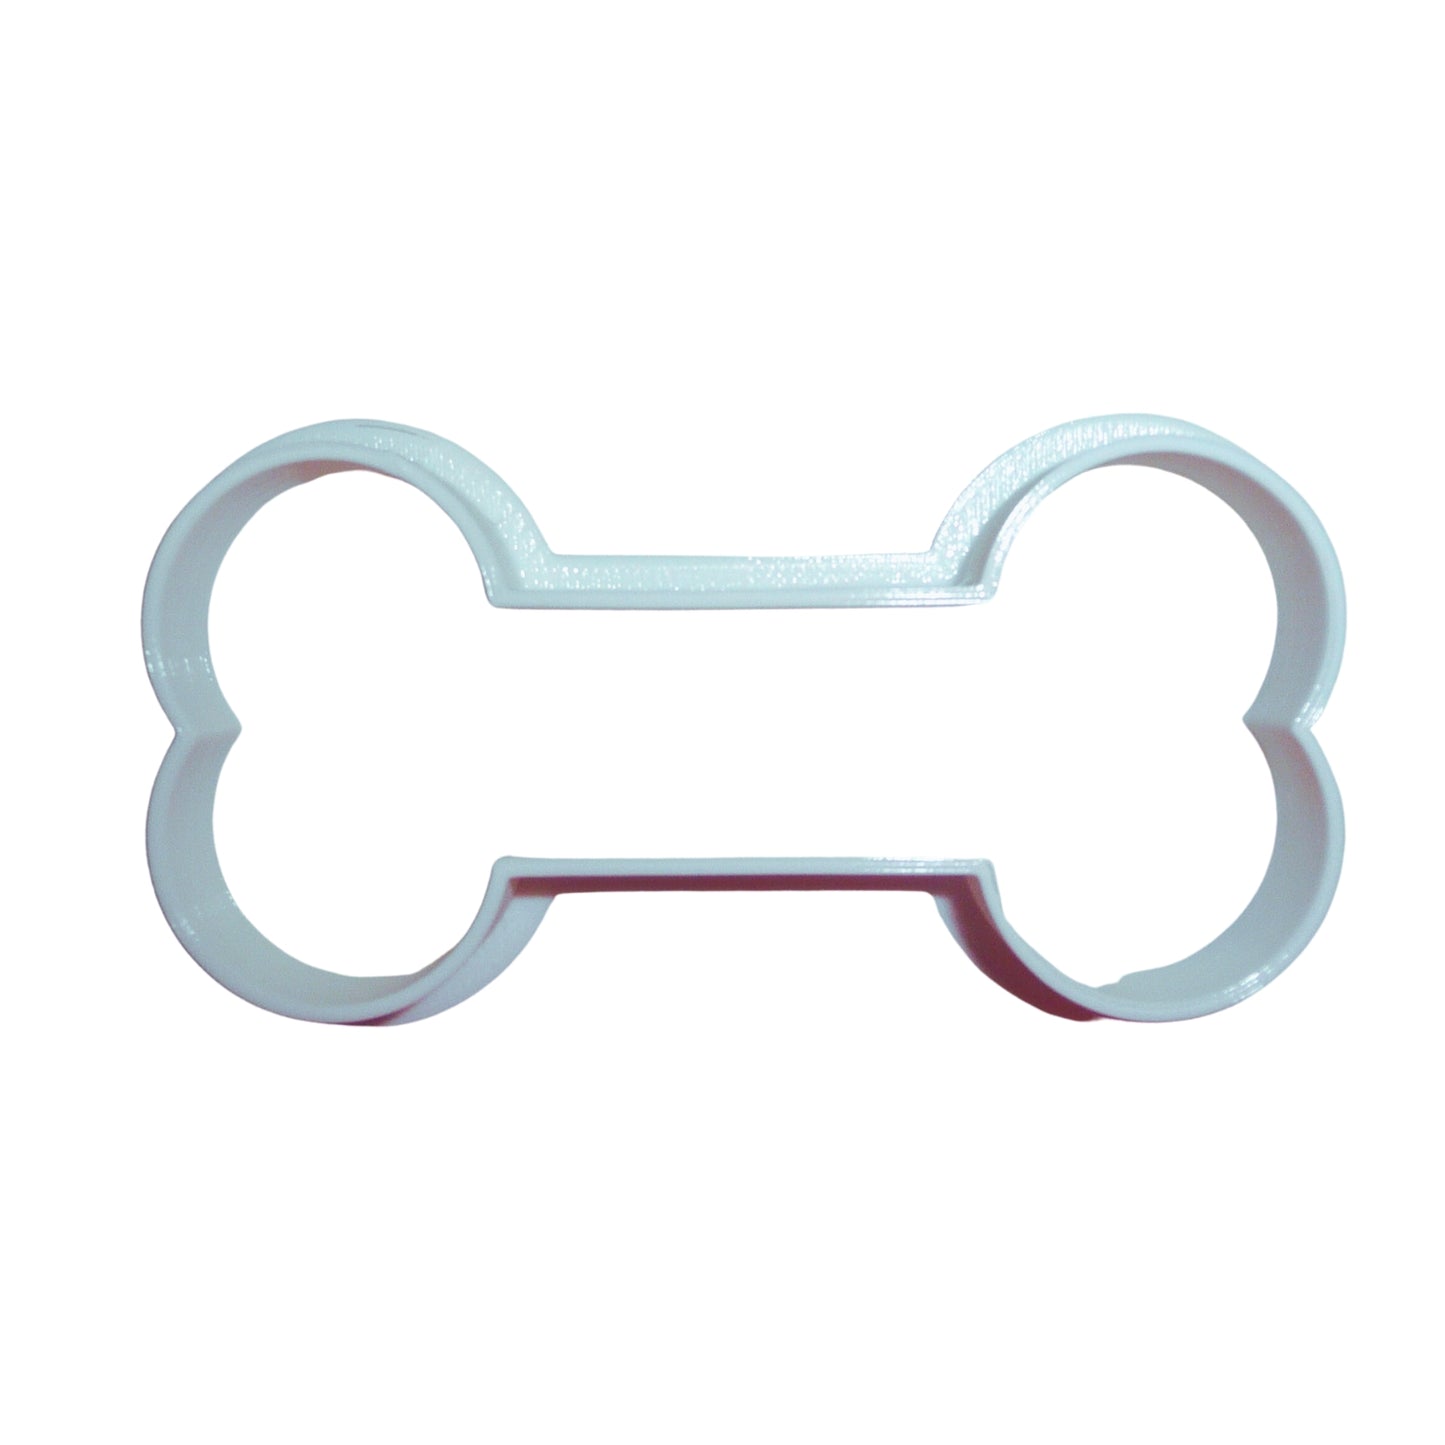 Dog Bone Biscuit Outline Cookie Cutter Made in USA PR100